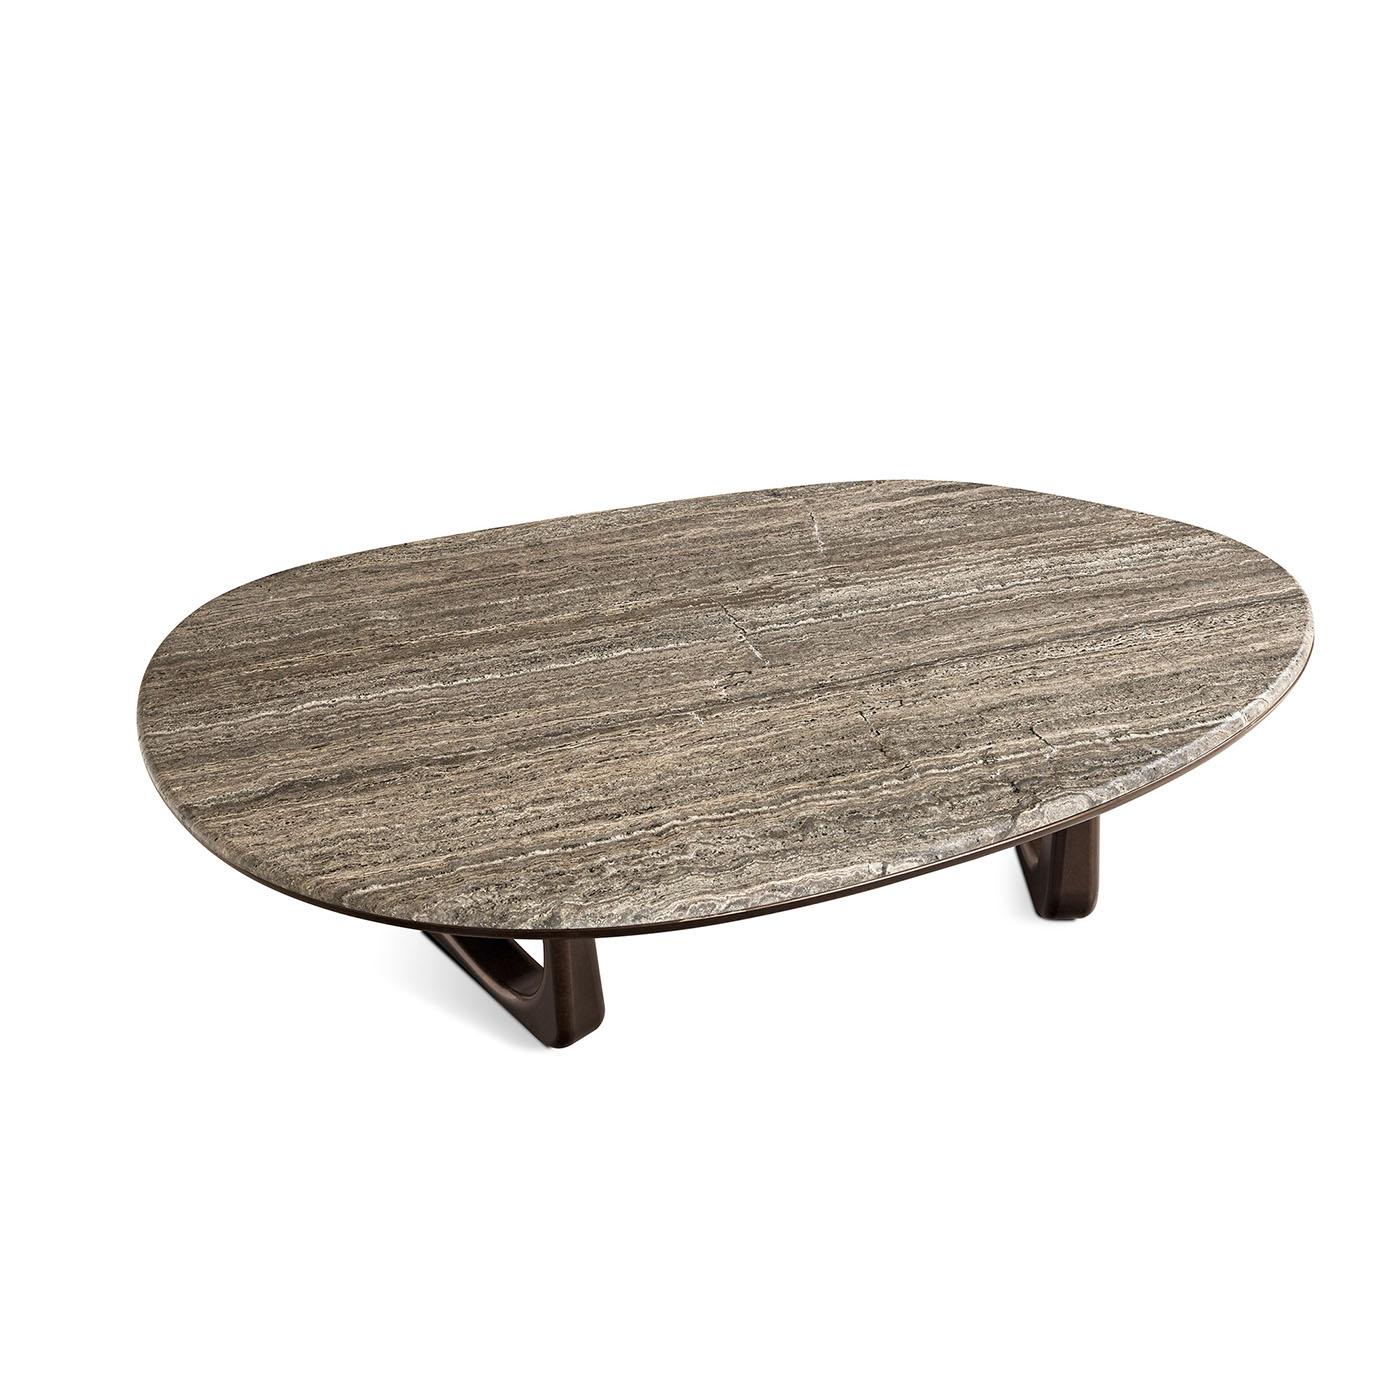 Precious coffee table with top in travertine marble and lacquered bases.